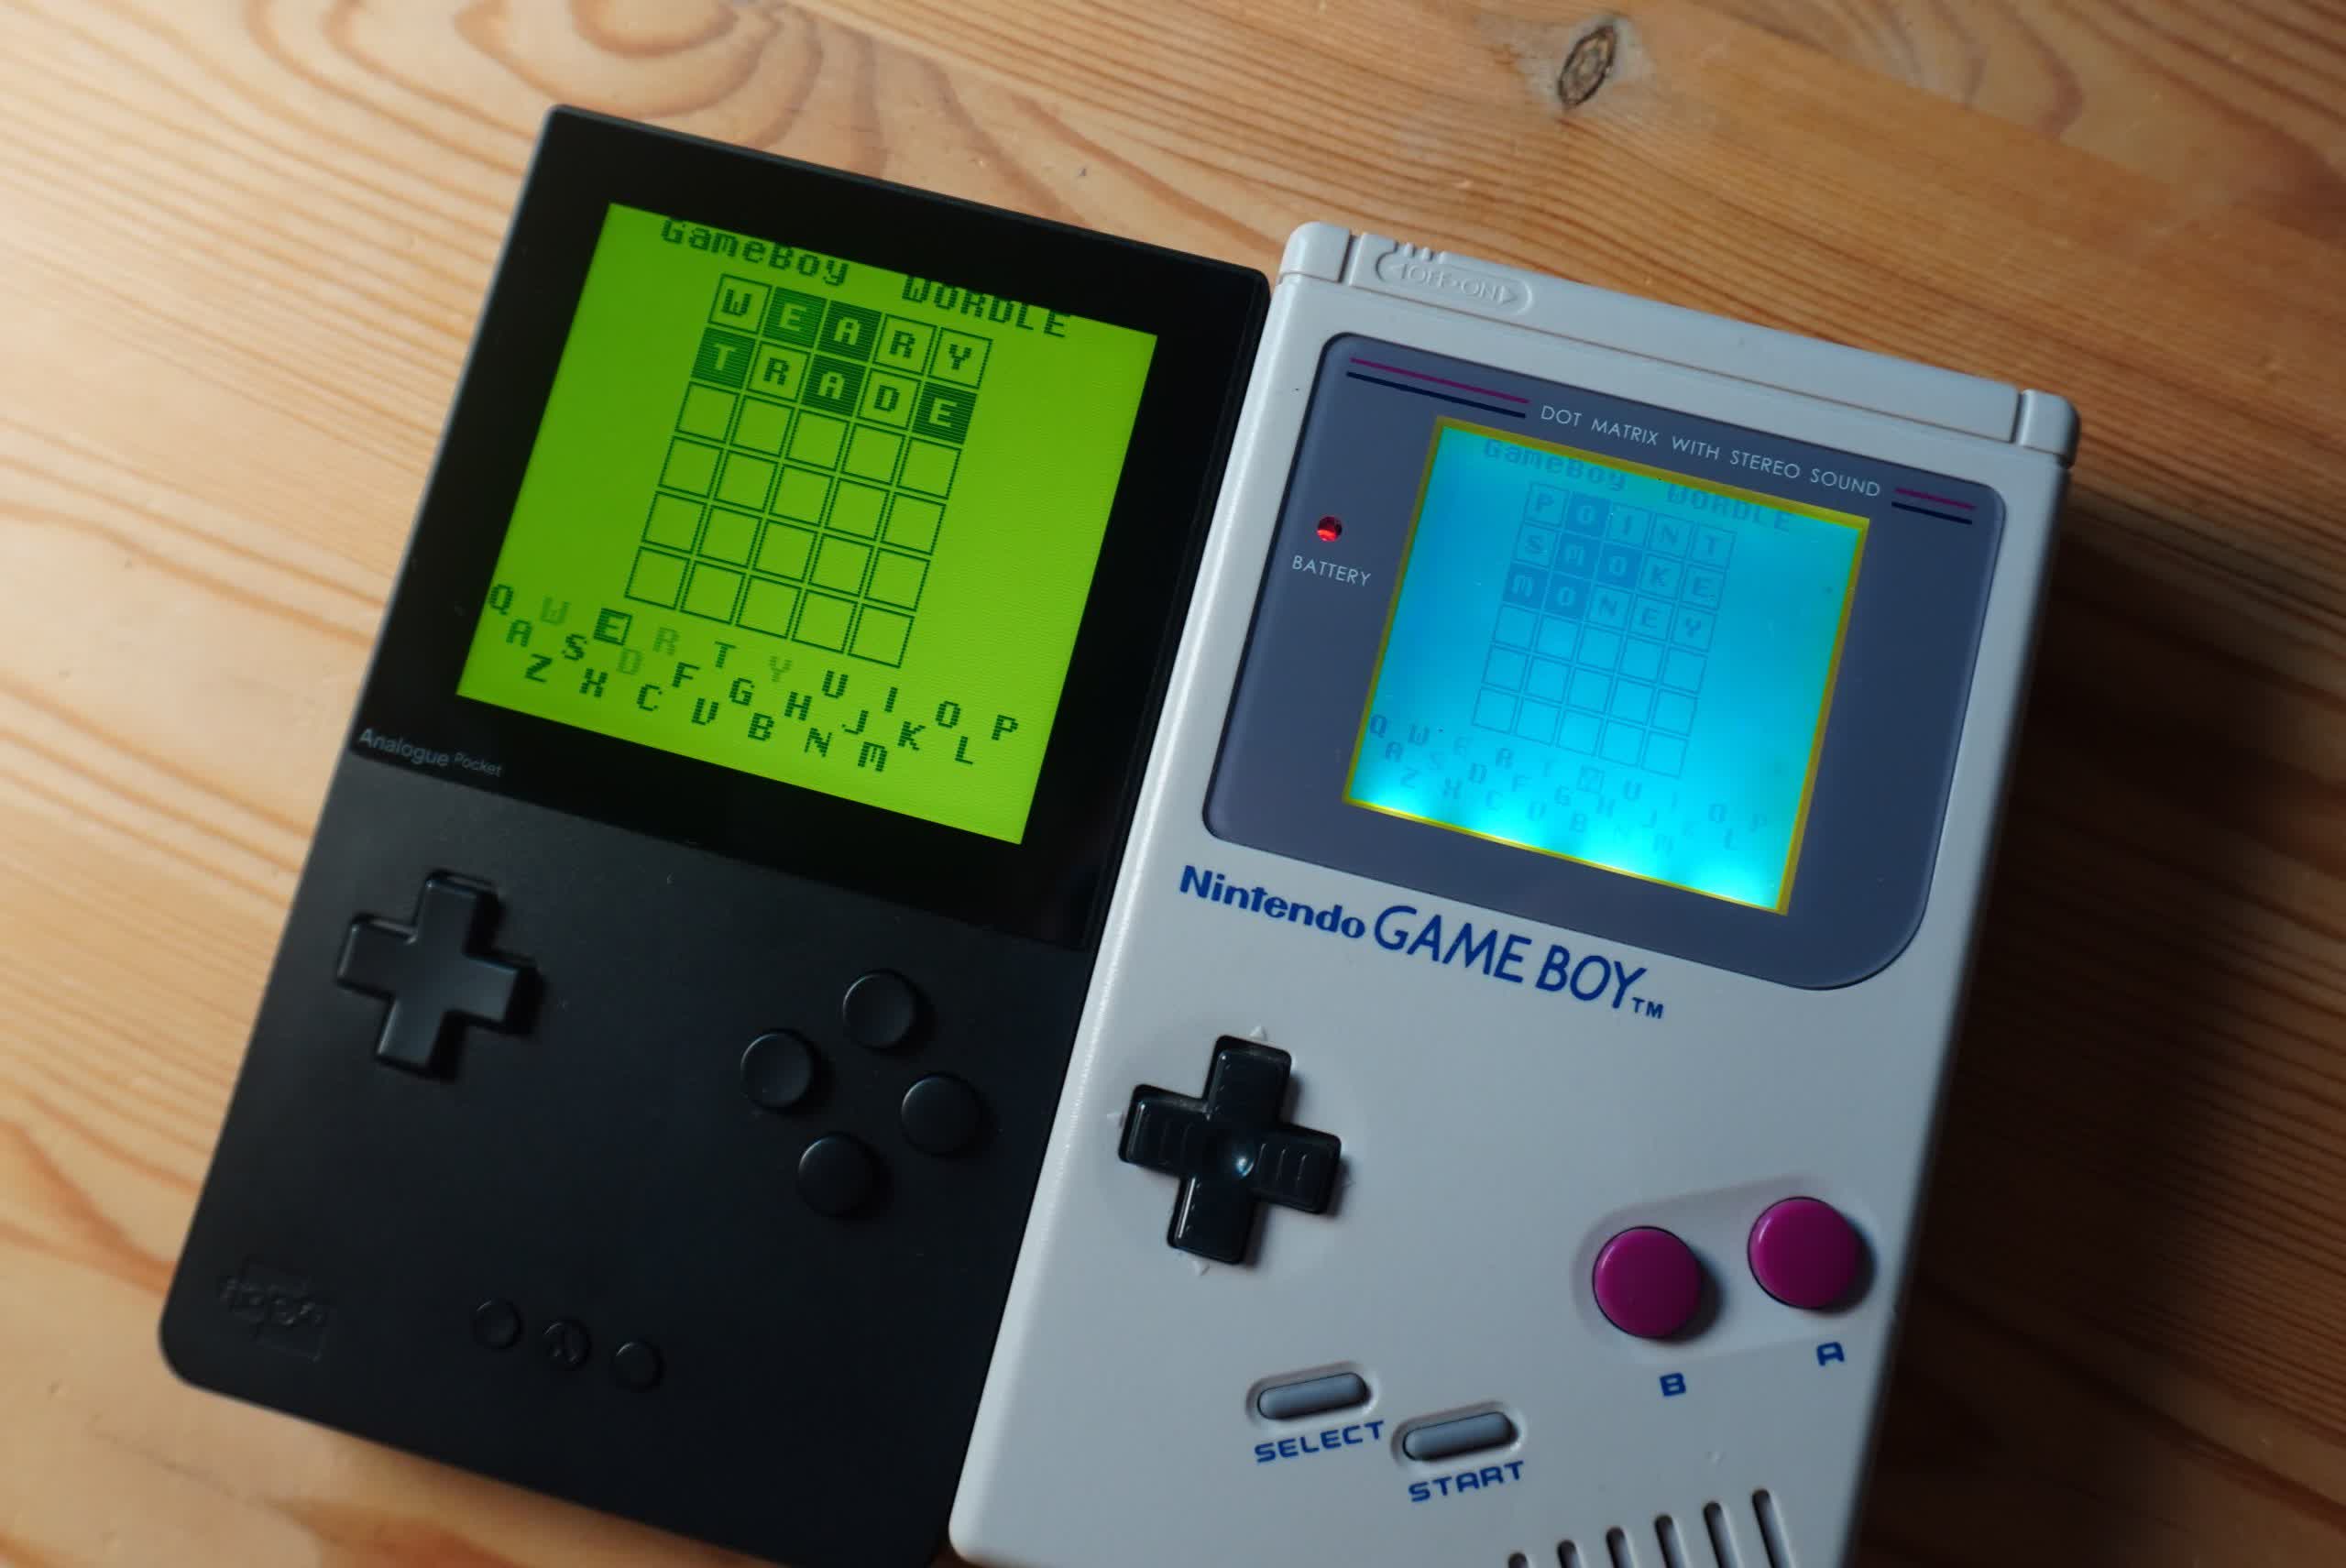 Someone unsurprisingly ported Wordle to the original Game Boy and Analogue Pocket